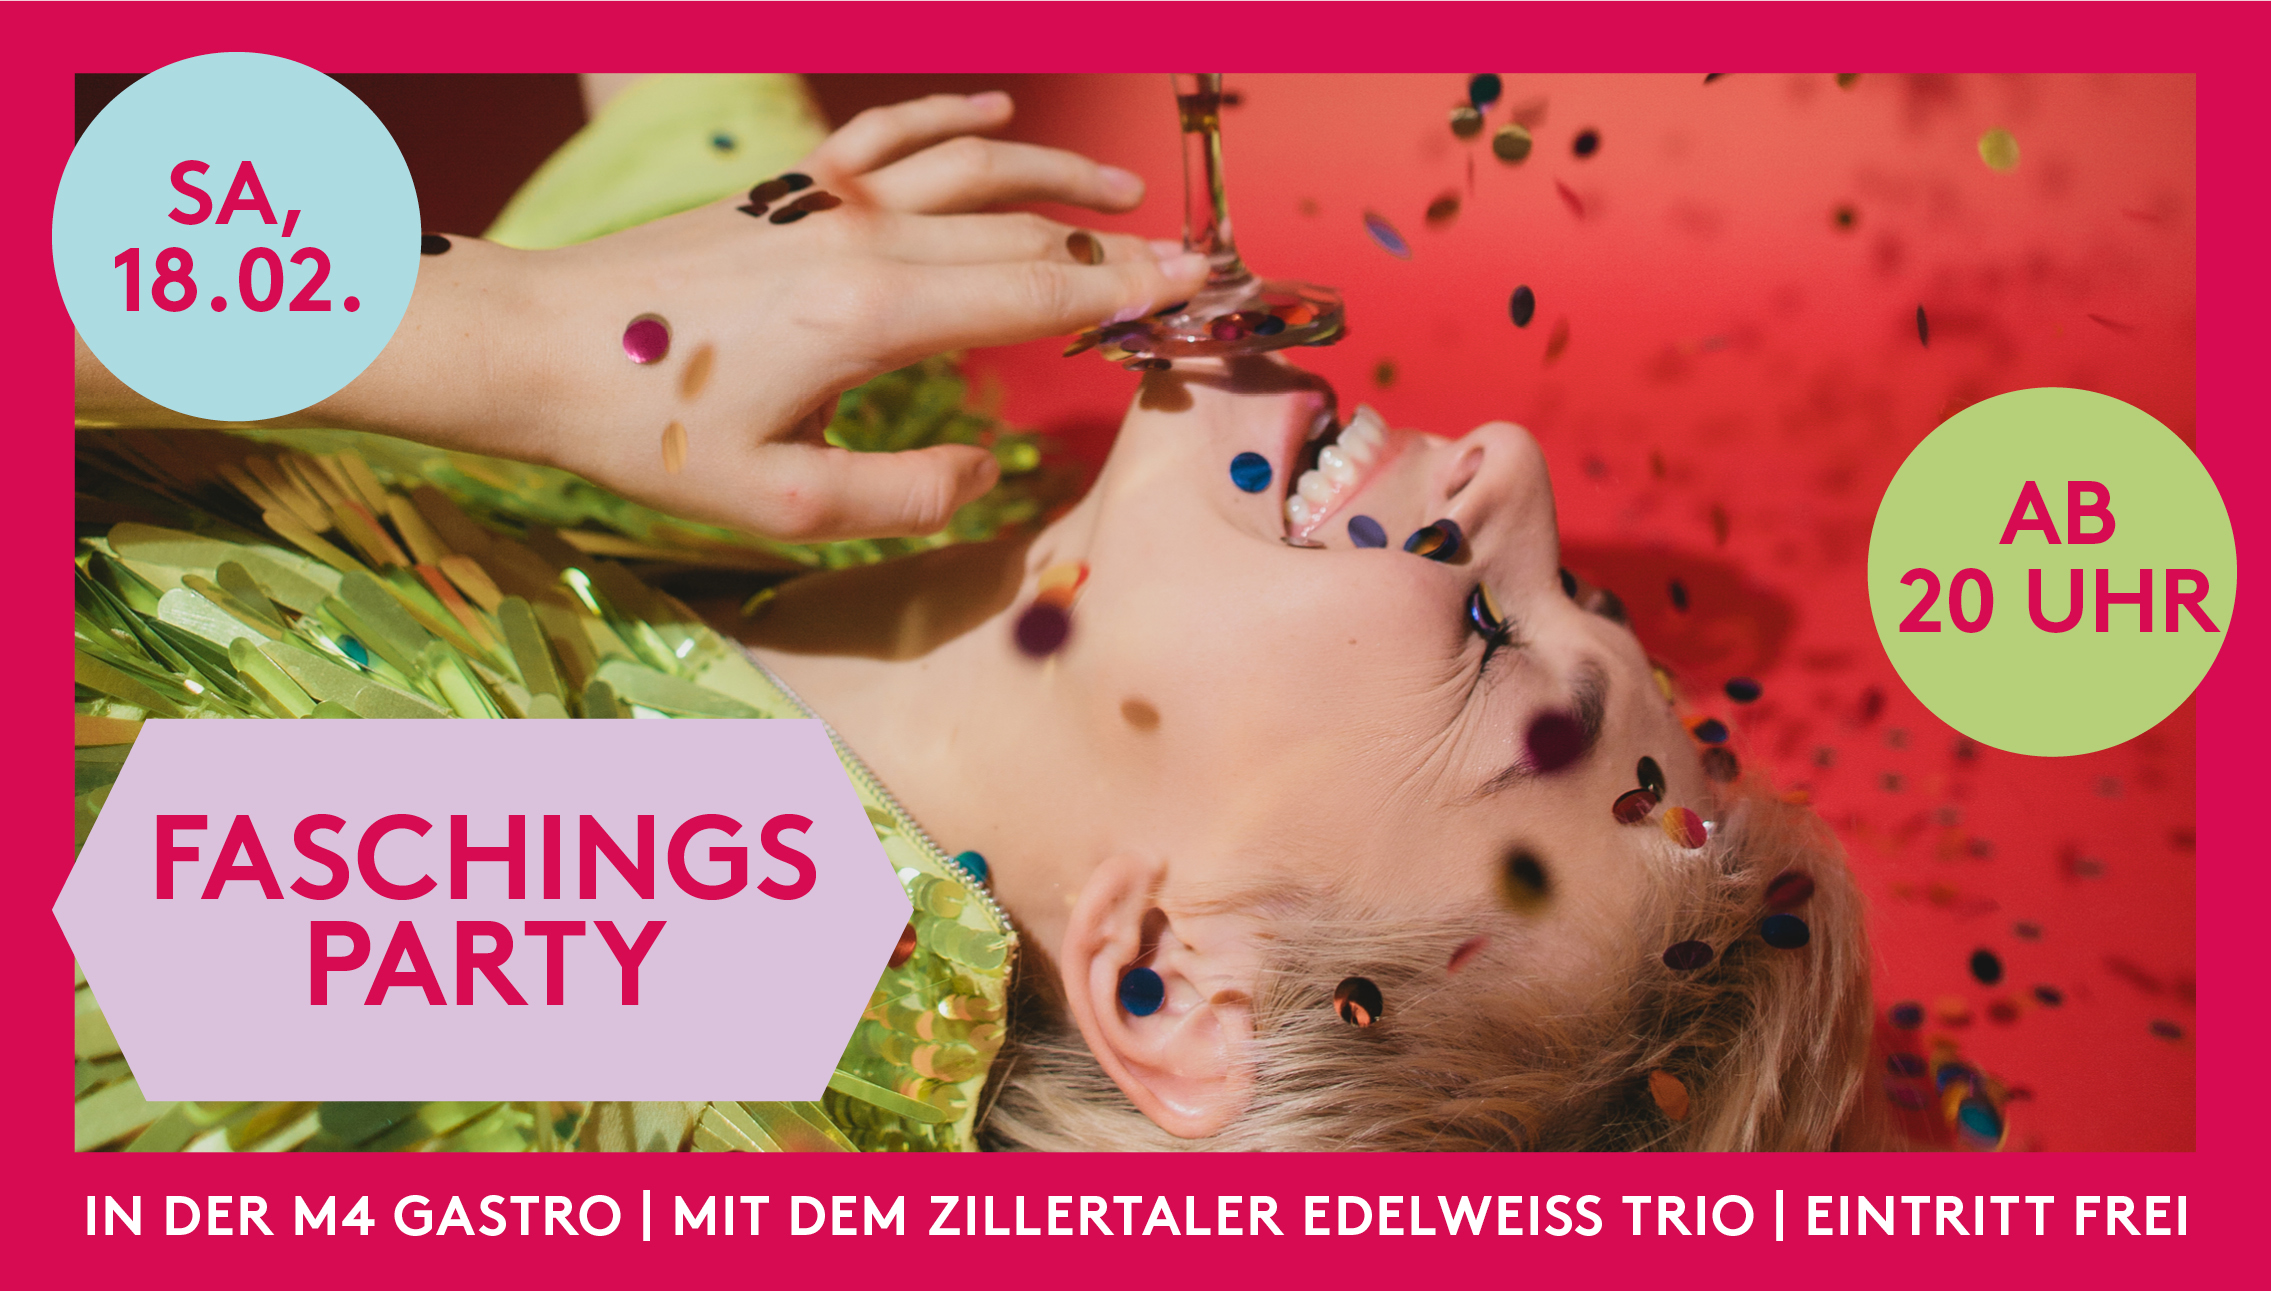 2023 02 02 M4 faschingsparty homepage 1080x620